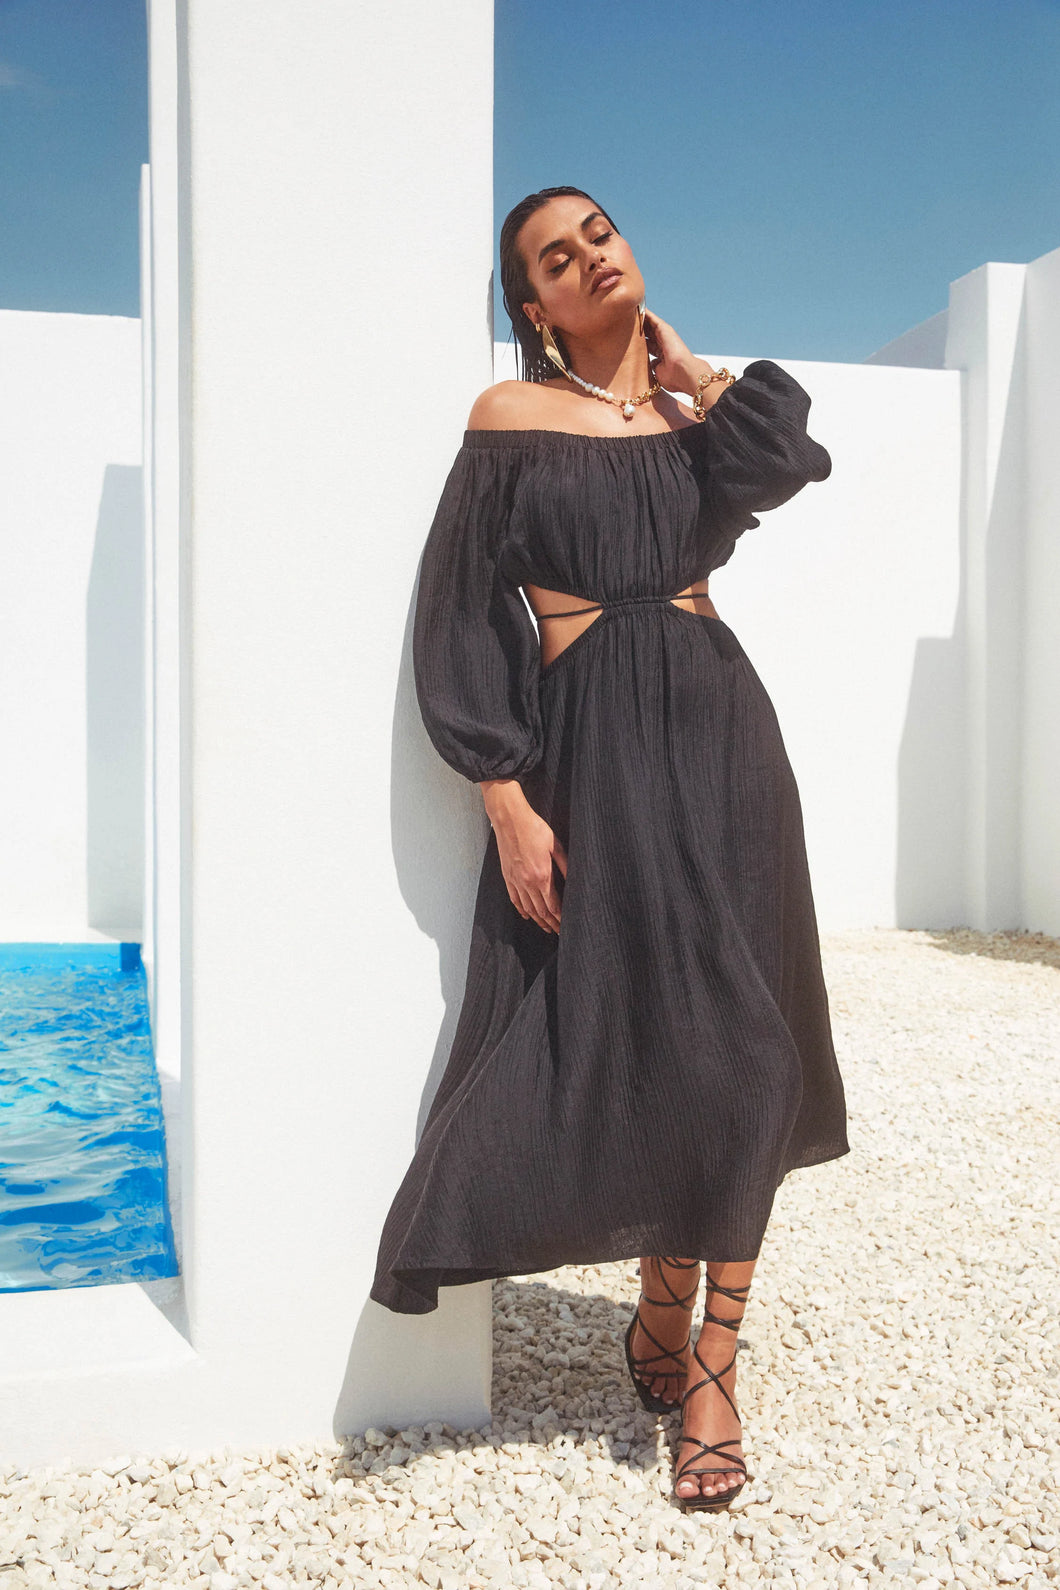 dress with sleeves, black midi dress, dress with side cutouts, vacation dress, Flowy midi/maxi length, off the shoulder dress, Cut out bodice